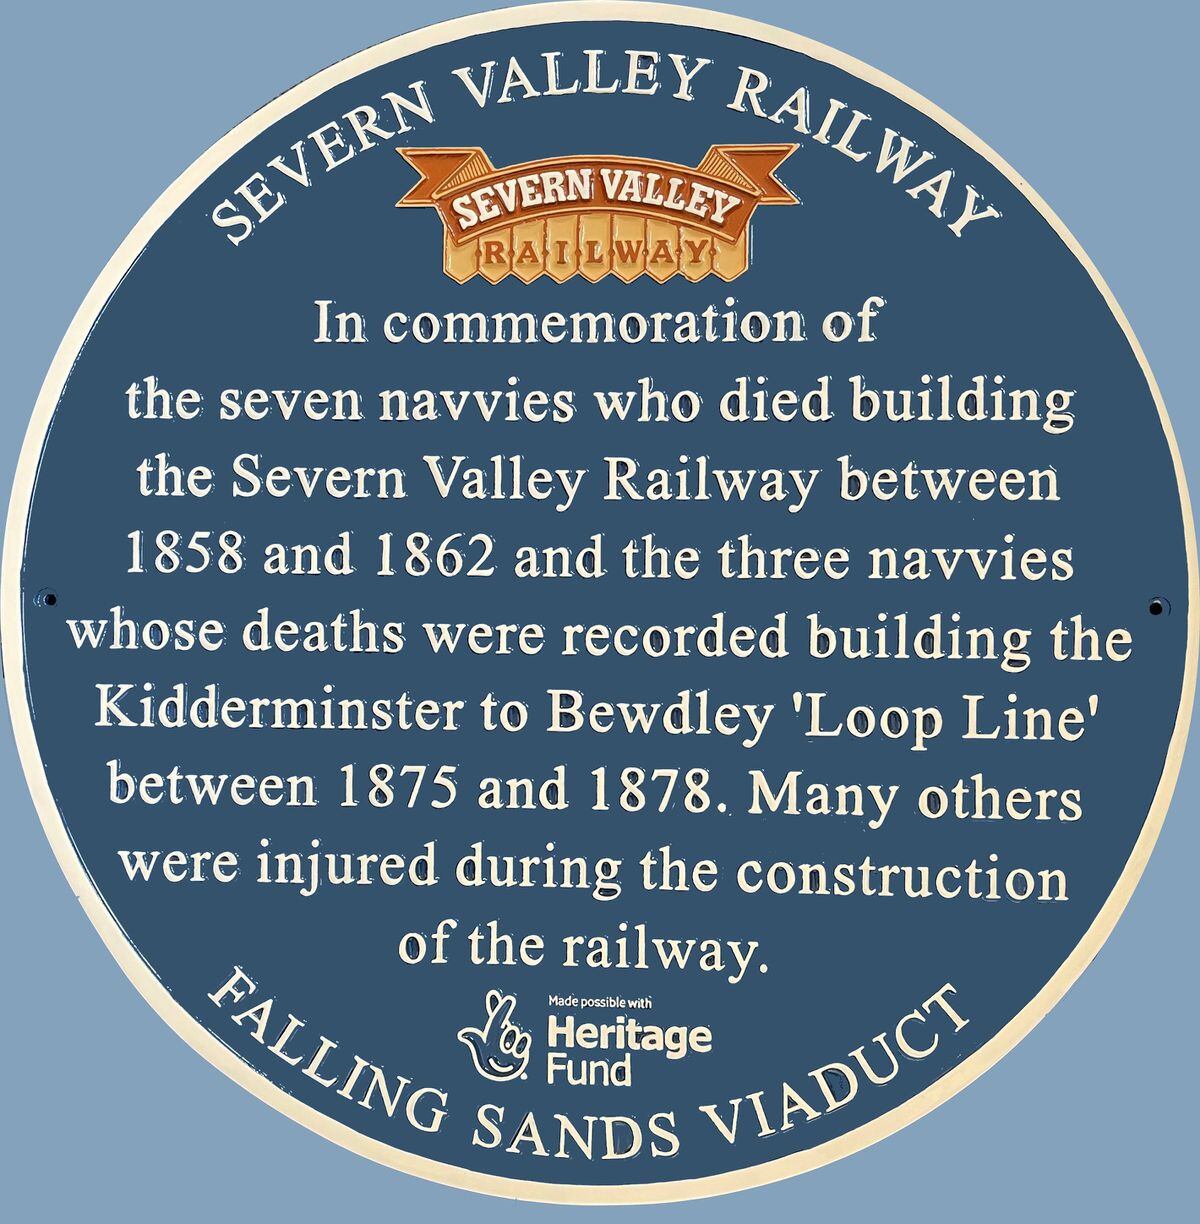 The seamen who died building the Severn Valley Railway have been honored with a blue memorial plaque